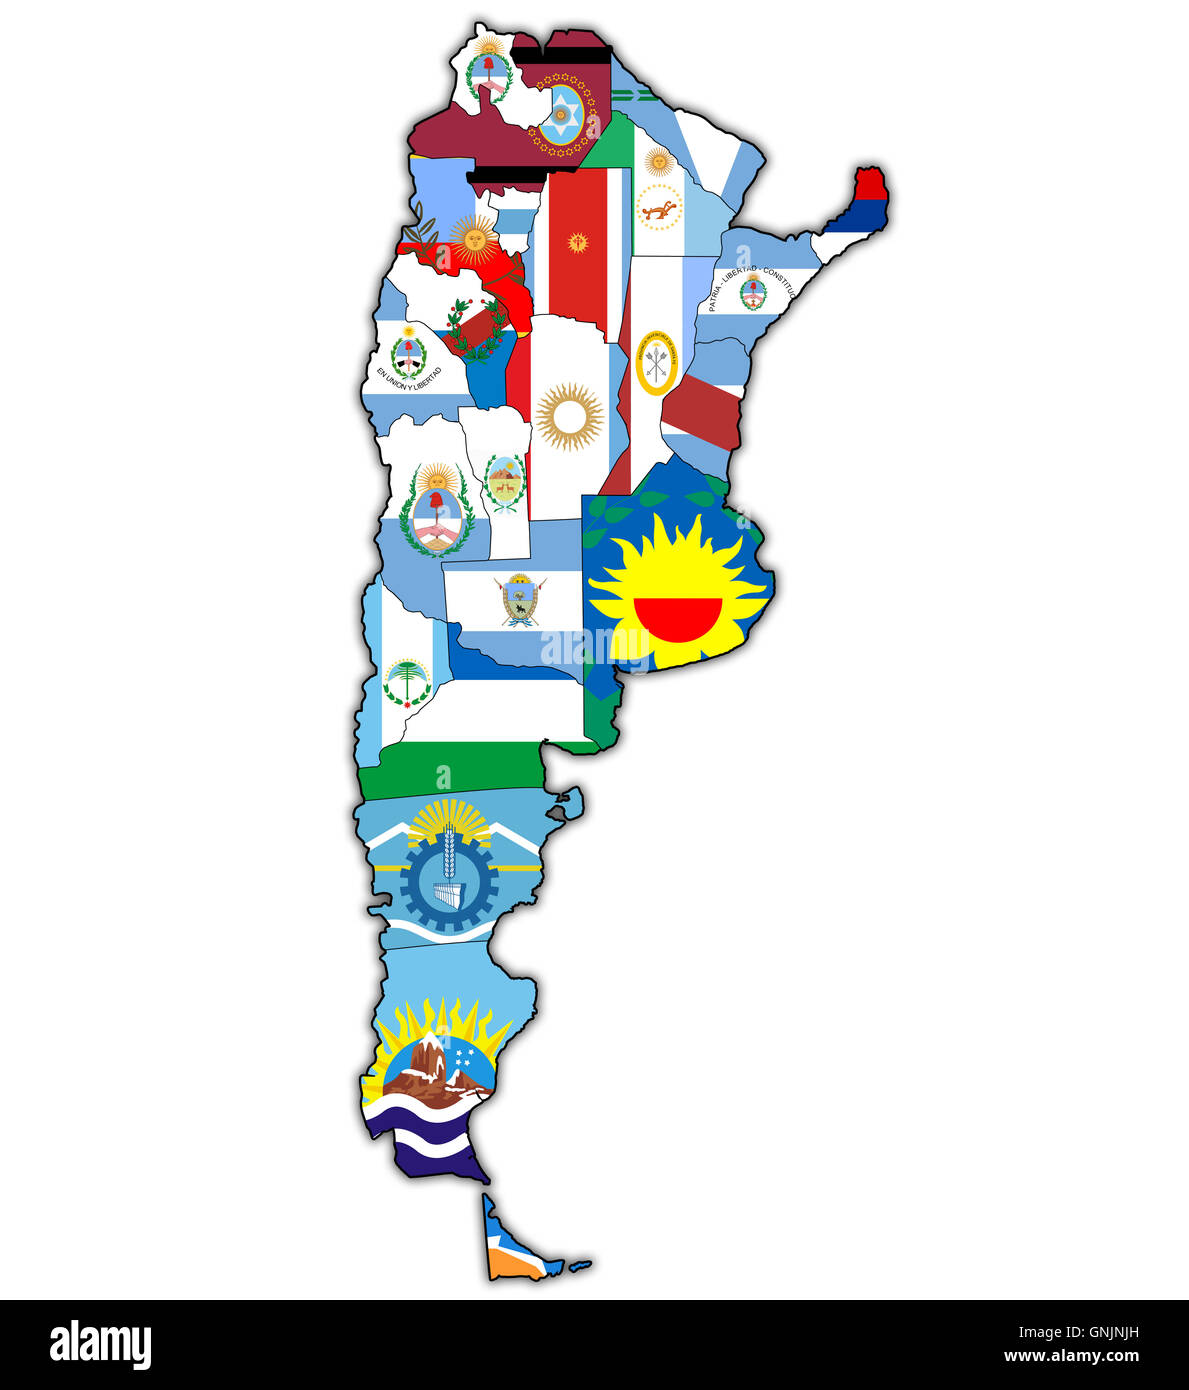 https://c8.alamy.com/comp/GNJNJH/regions-of-argentina-with-flags-on-map-of-administrative-divisions-GNJNJH.jpg